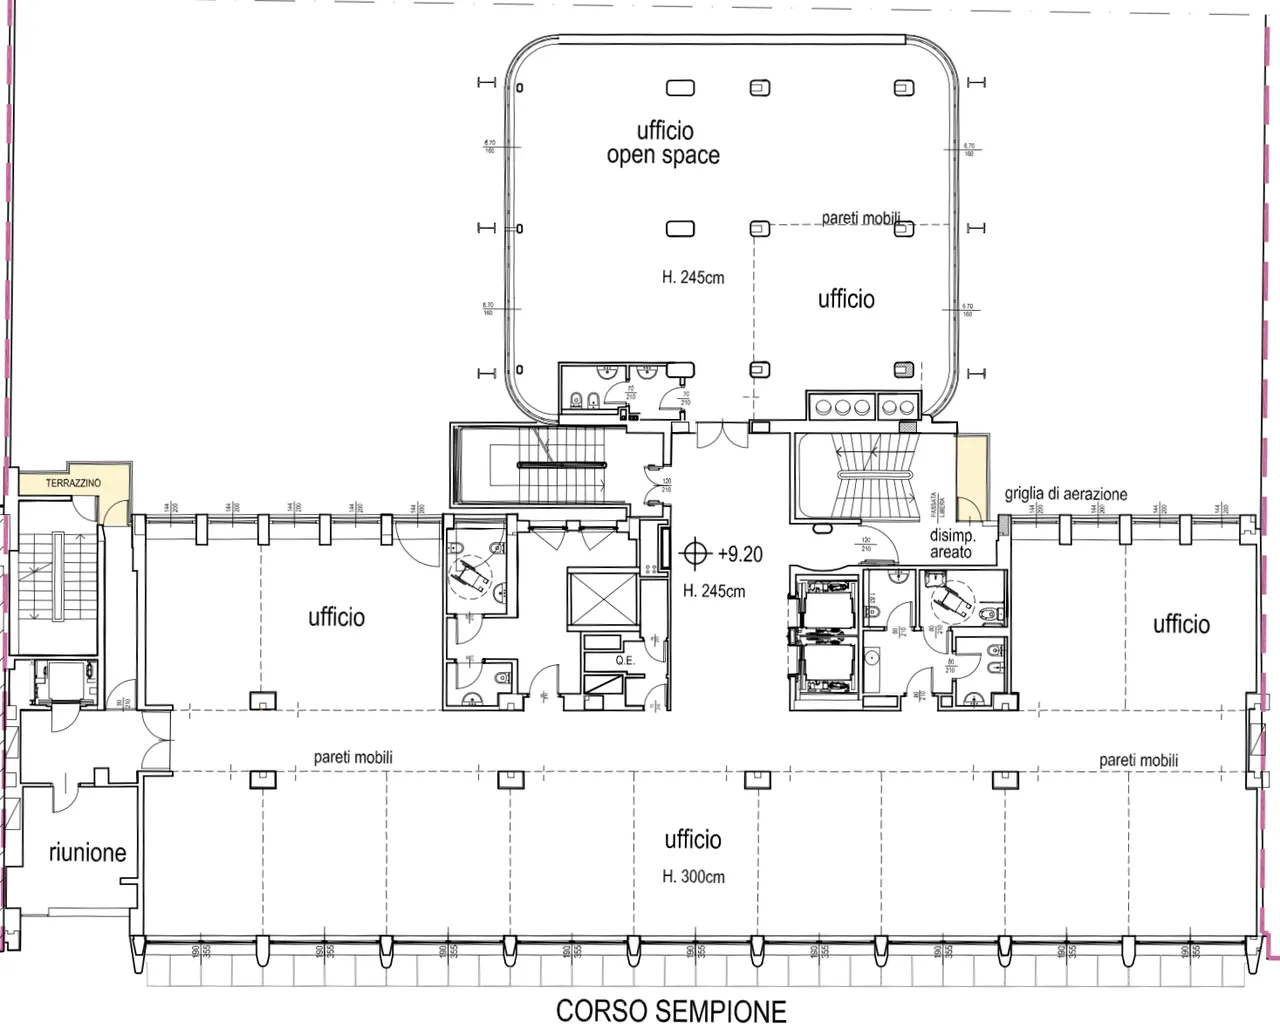 office - Sempione 68 - Office - Dils - Floor Plan - 1